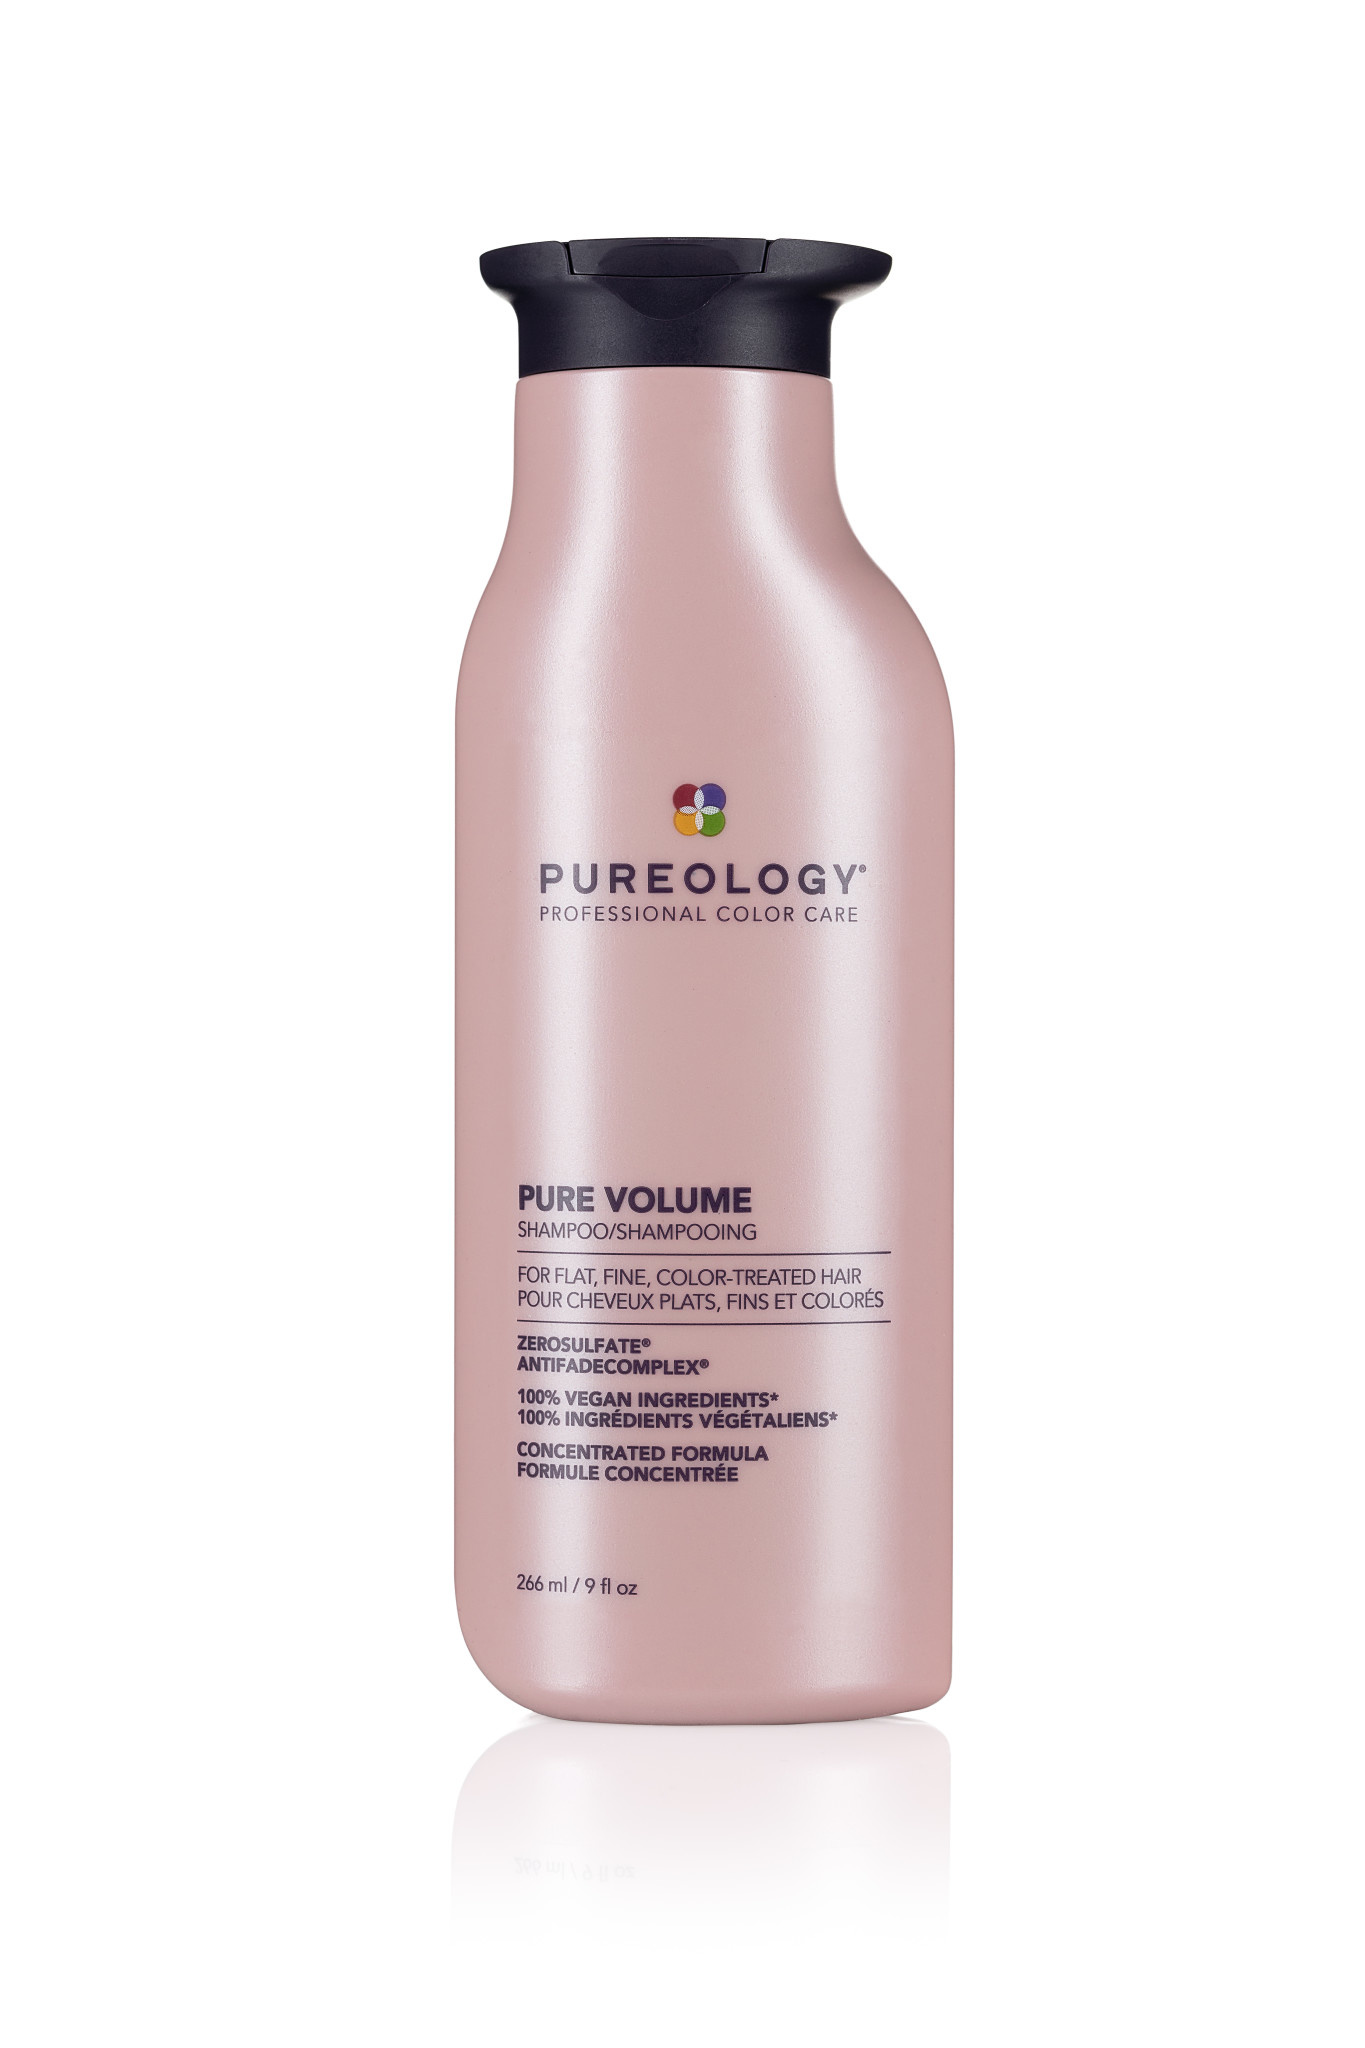 PUREOLOGY - PURE VOLUME Shampooing